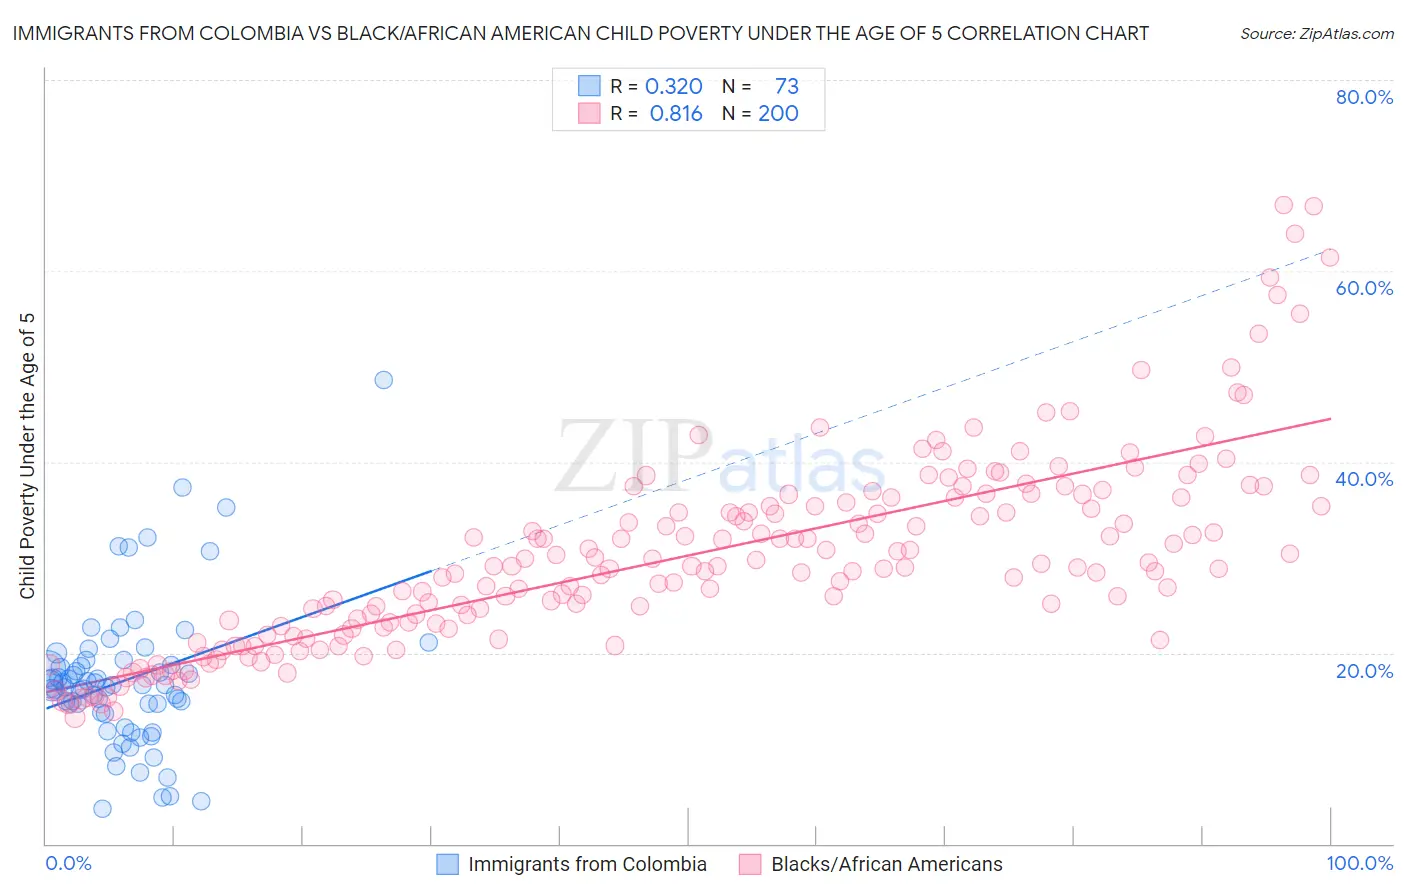 Immigrants from Colombia vs Black/African American Child Poverty Under the Age of 5